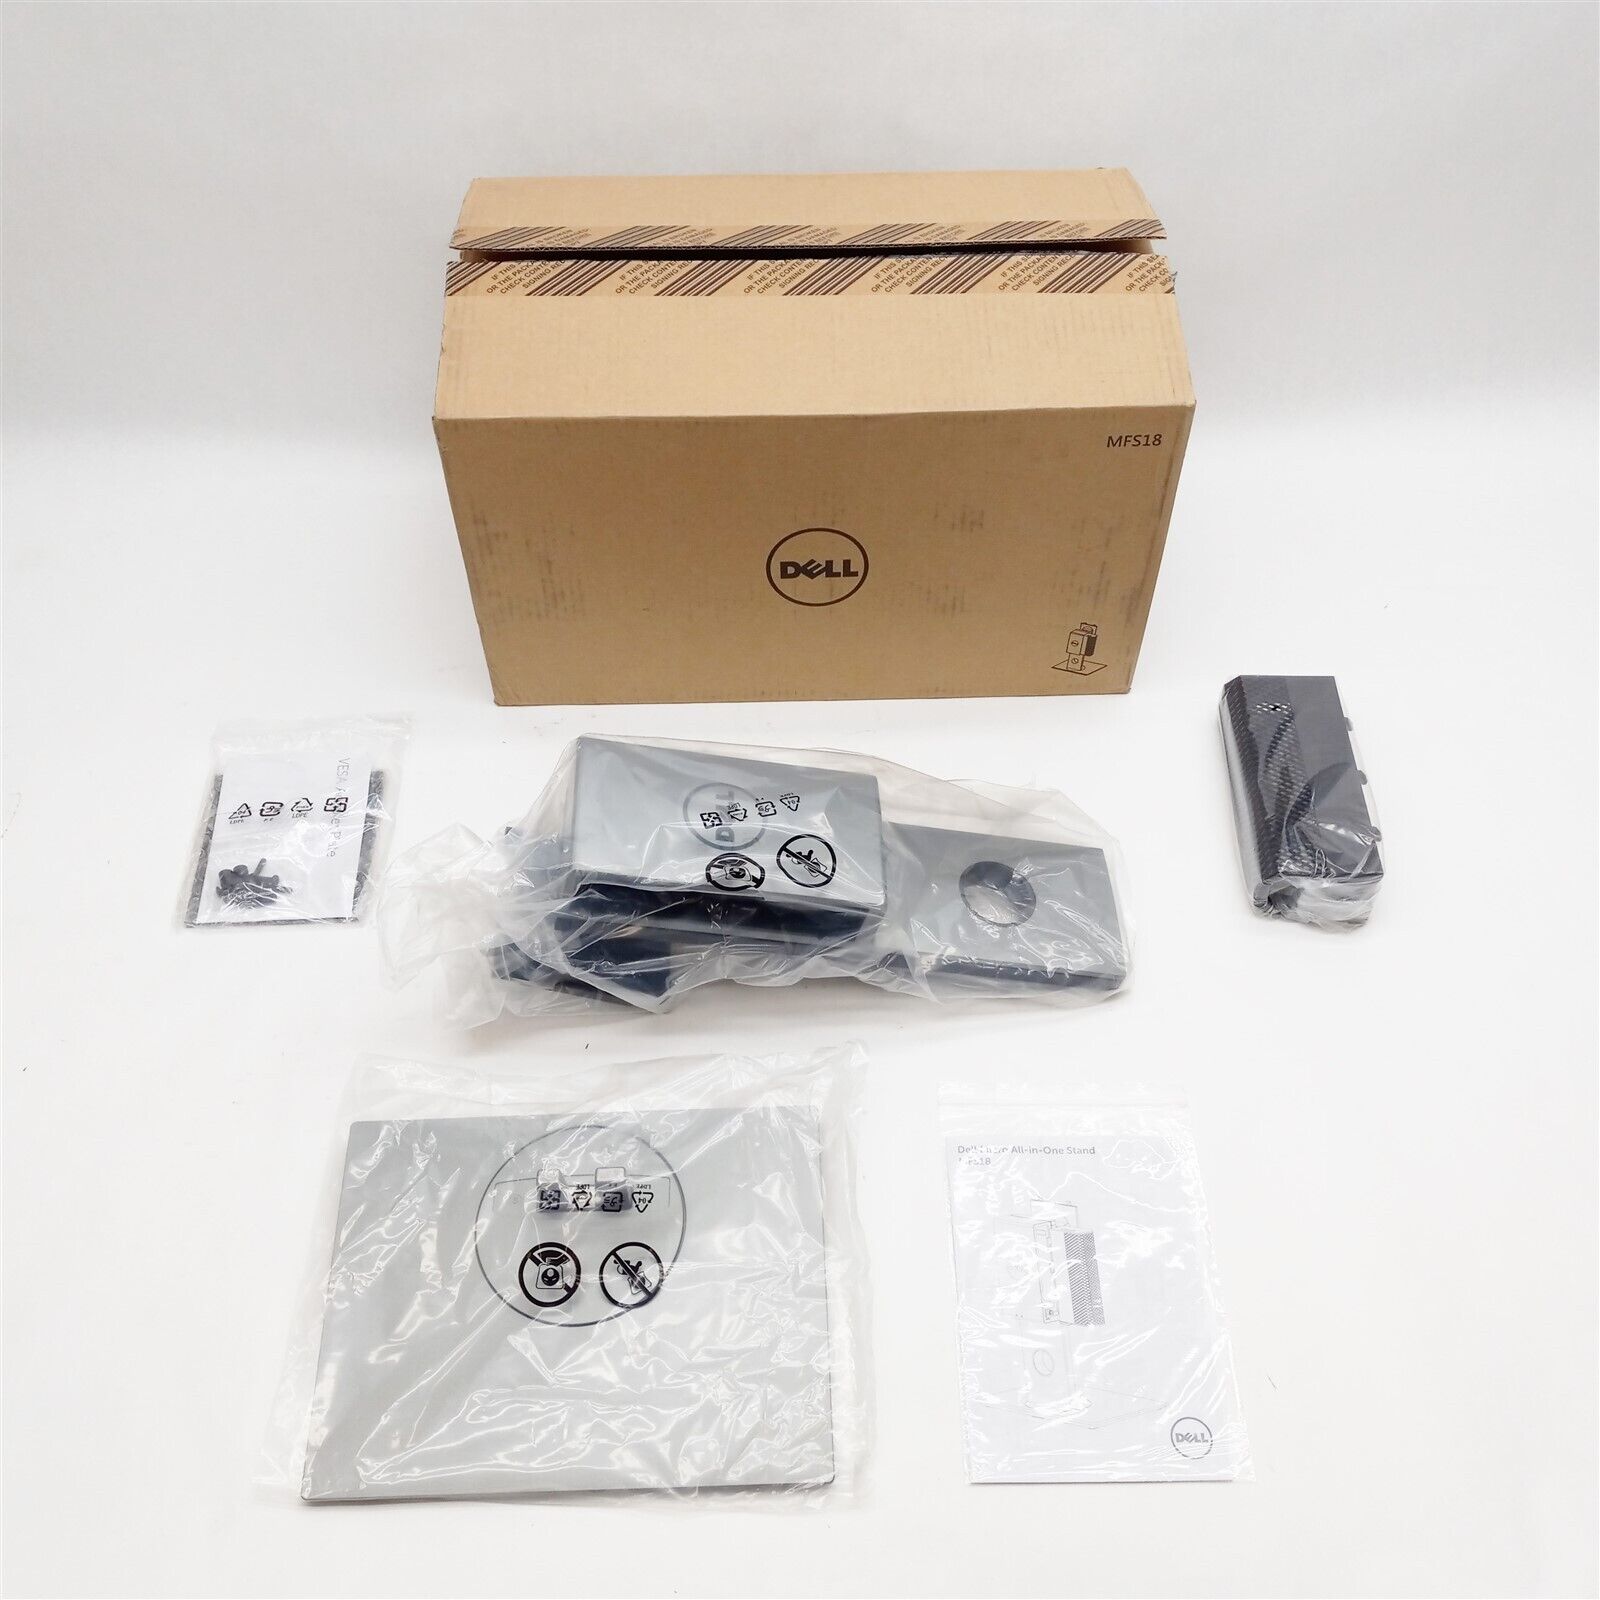 New Dell MFS18 Compact Micro Form Factor All-in-One AIO Monitor Stand 0N85GR